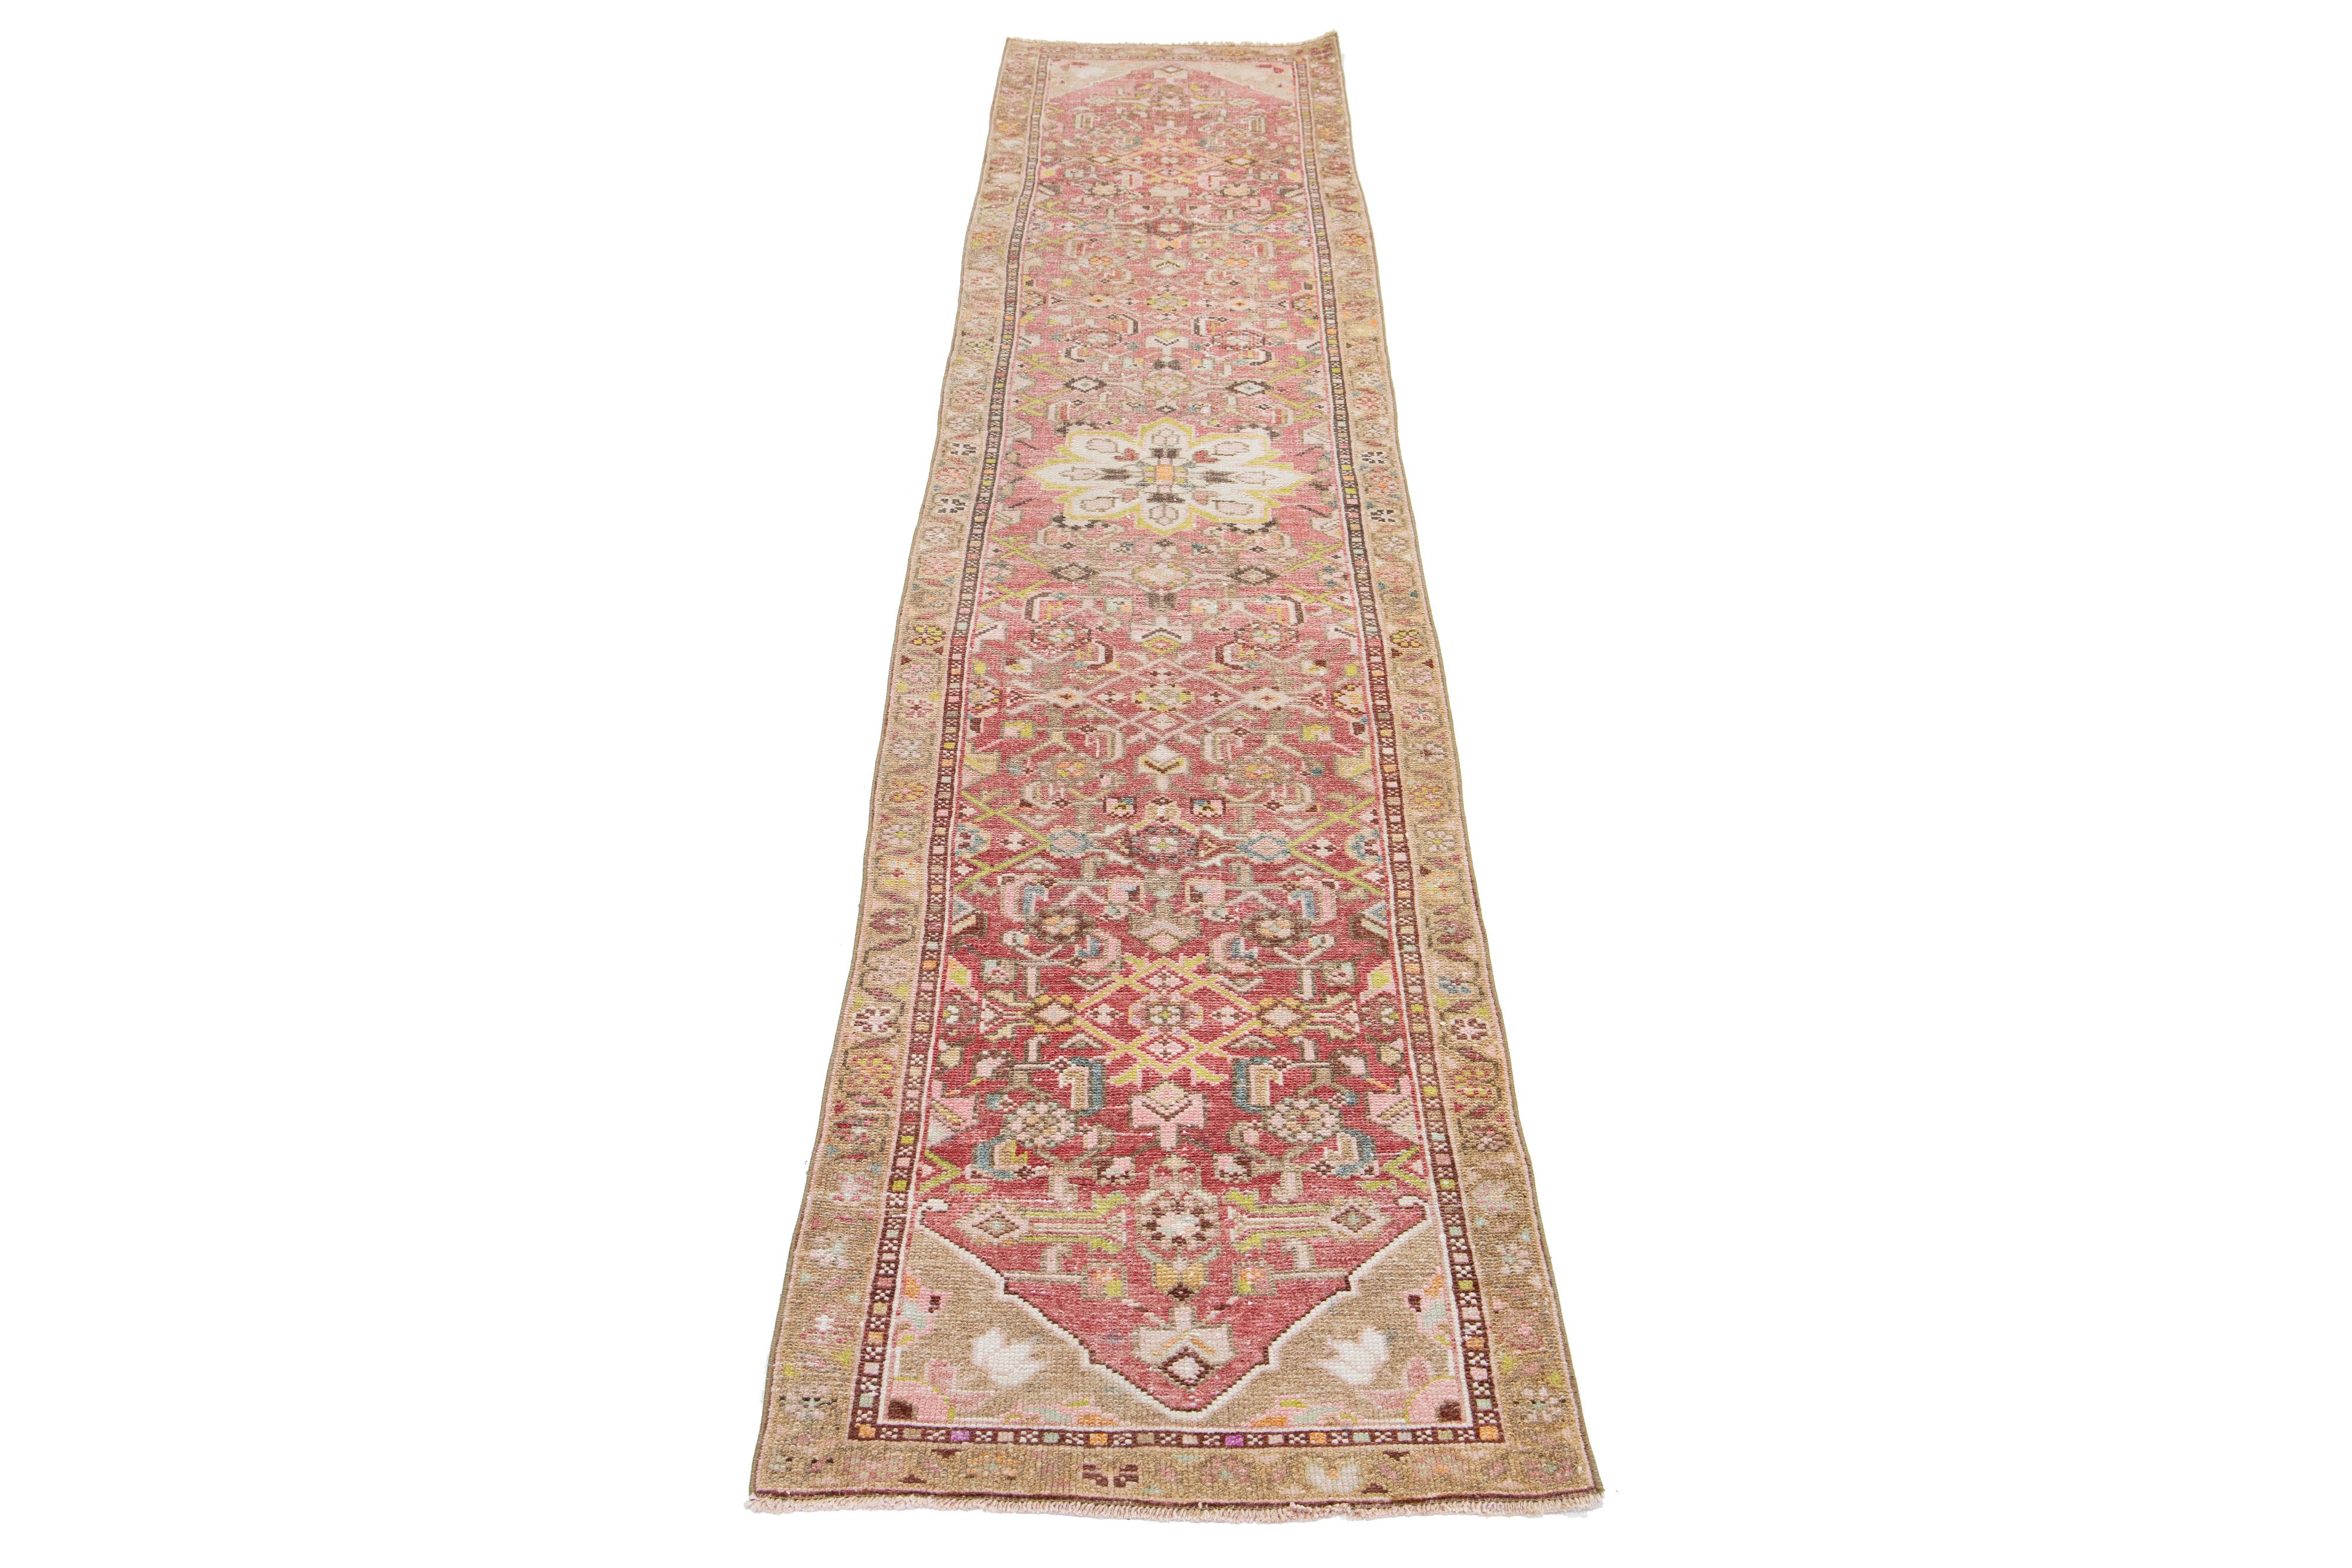 This Persian Heriz wool rug showcases an exquisite traditional floral medallion design with striking multicolor accents against a light pink background. 

This rug measures 2' x 9'6